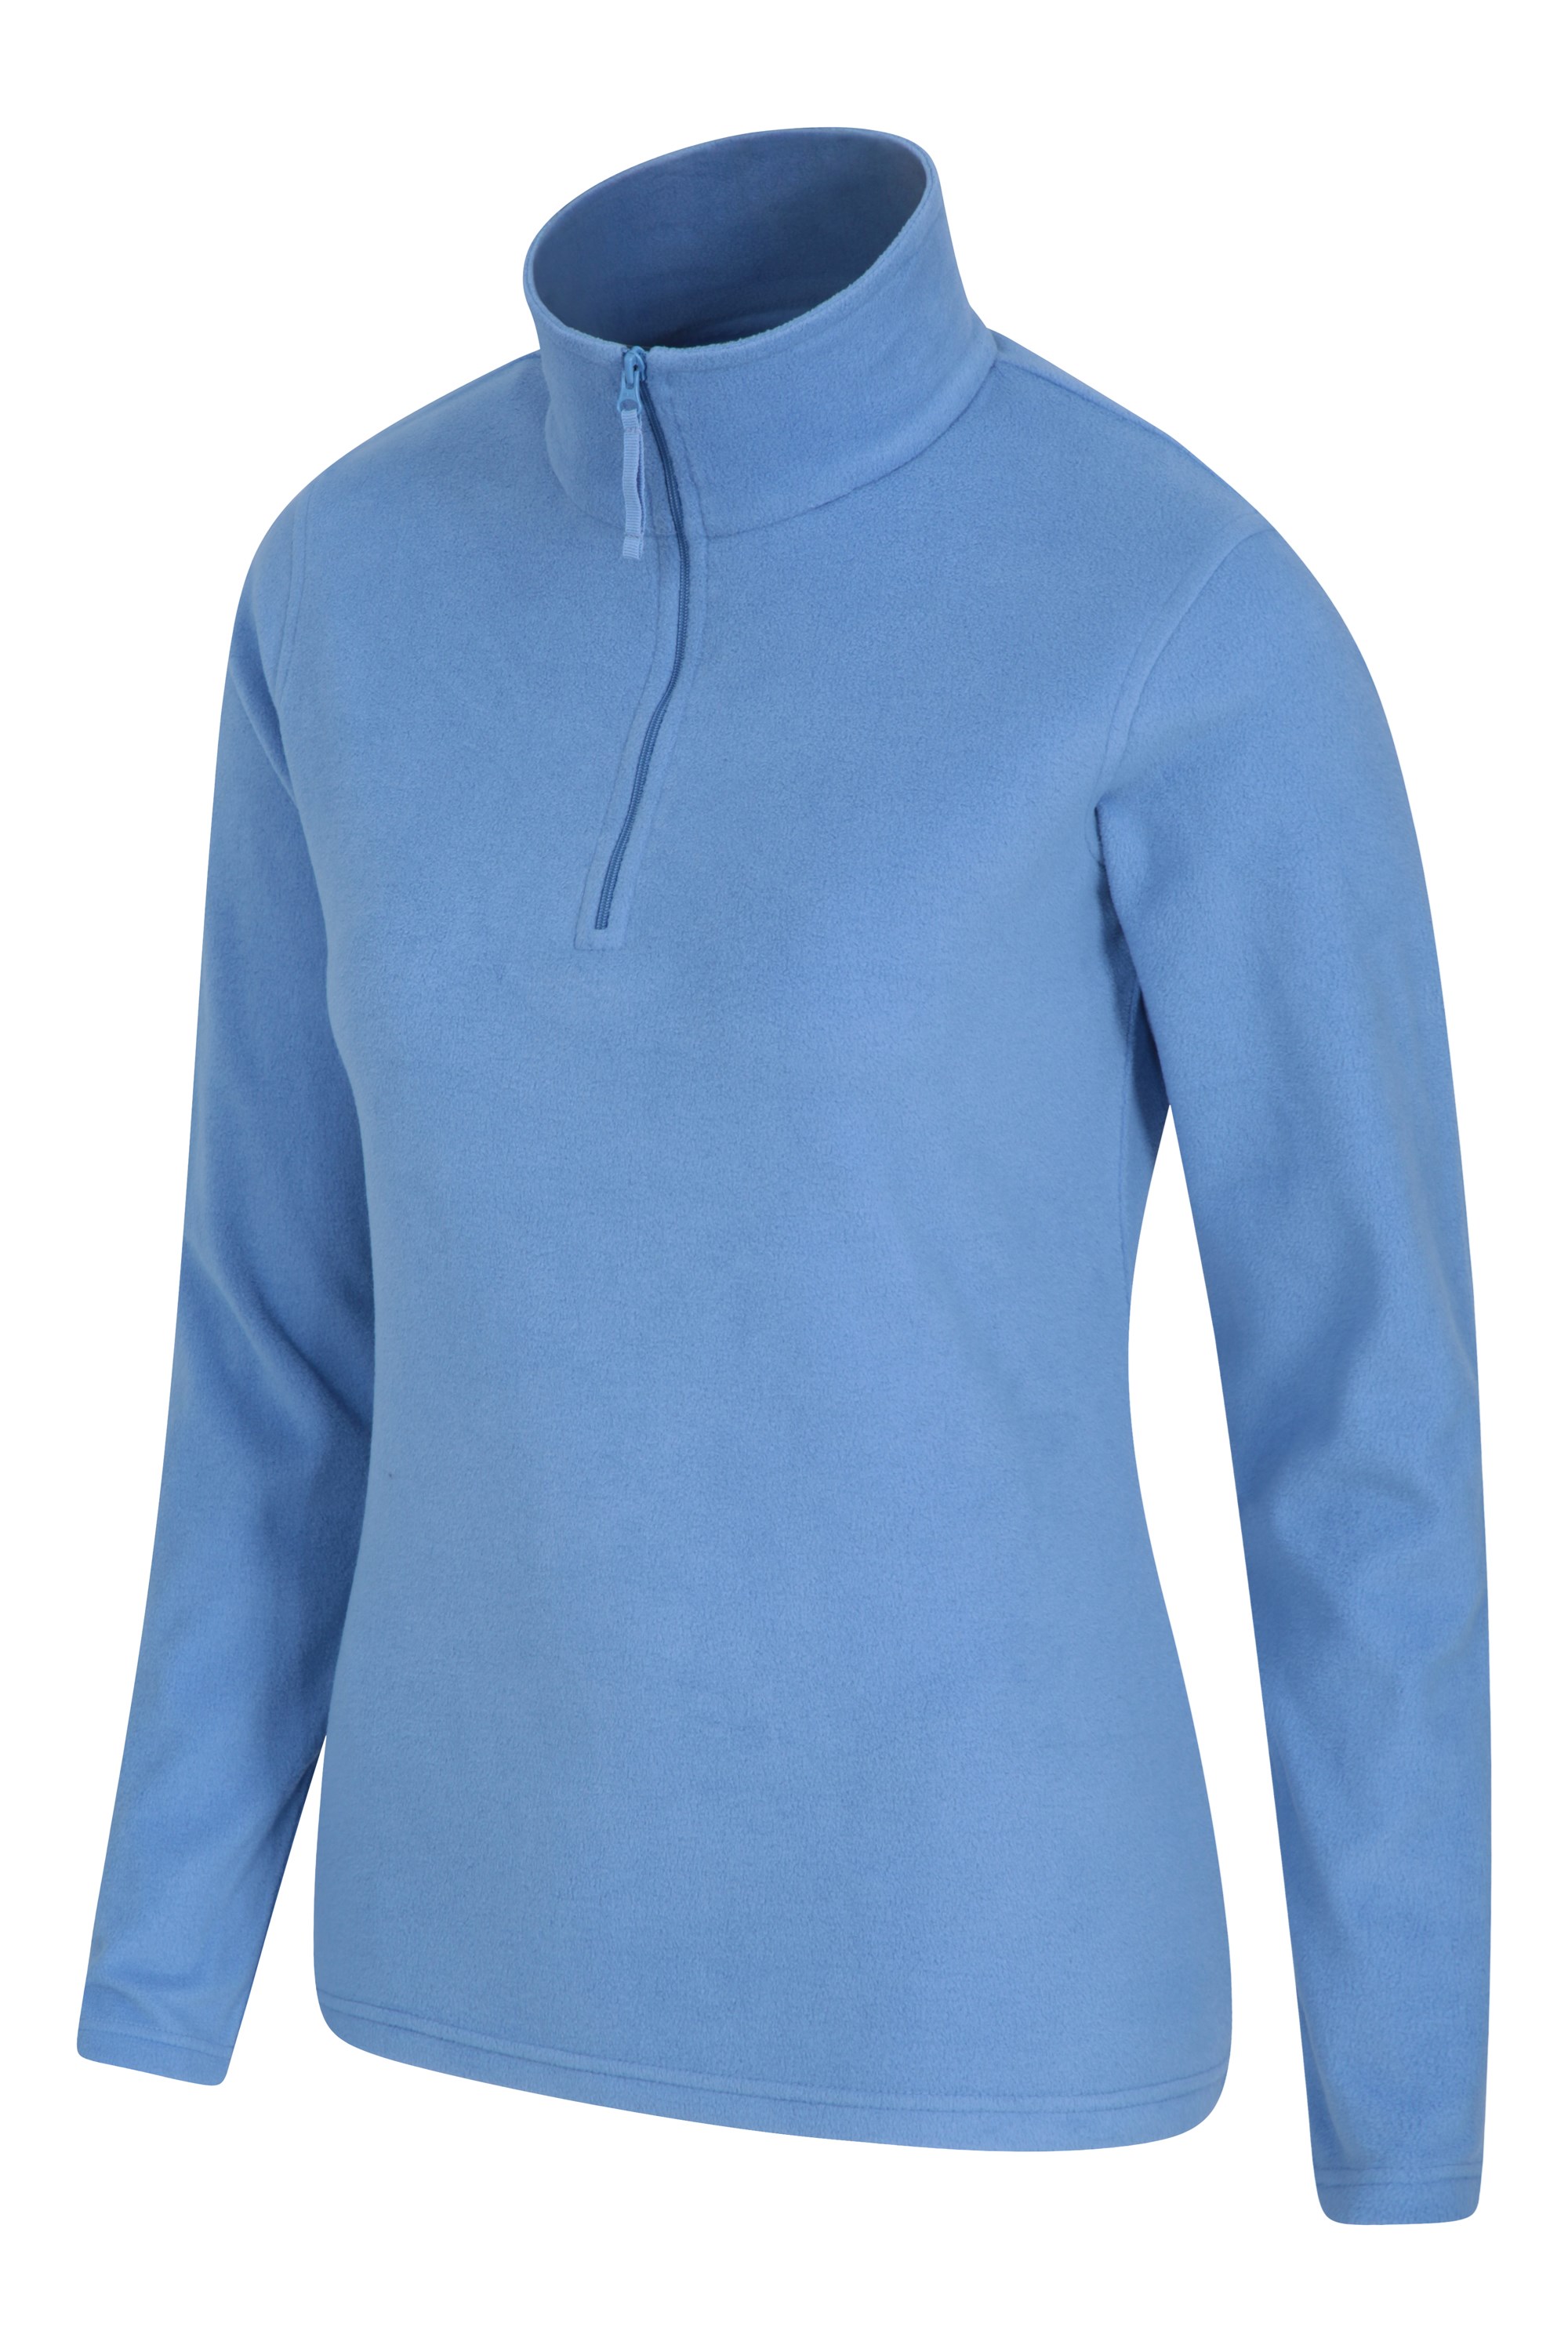 Mountain Warehouse Womens Microfleece Half Zip with Antipill and Quick Drying 